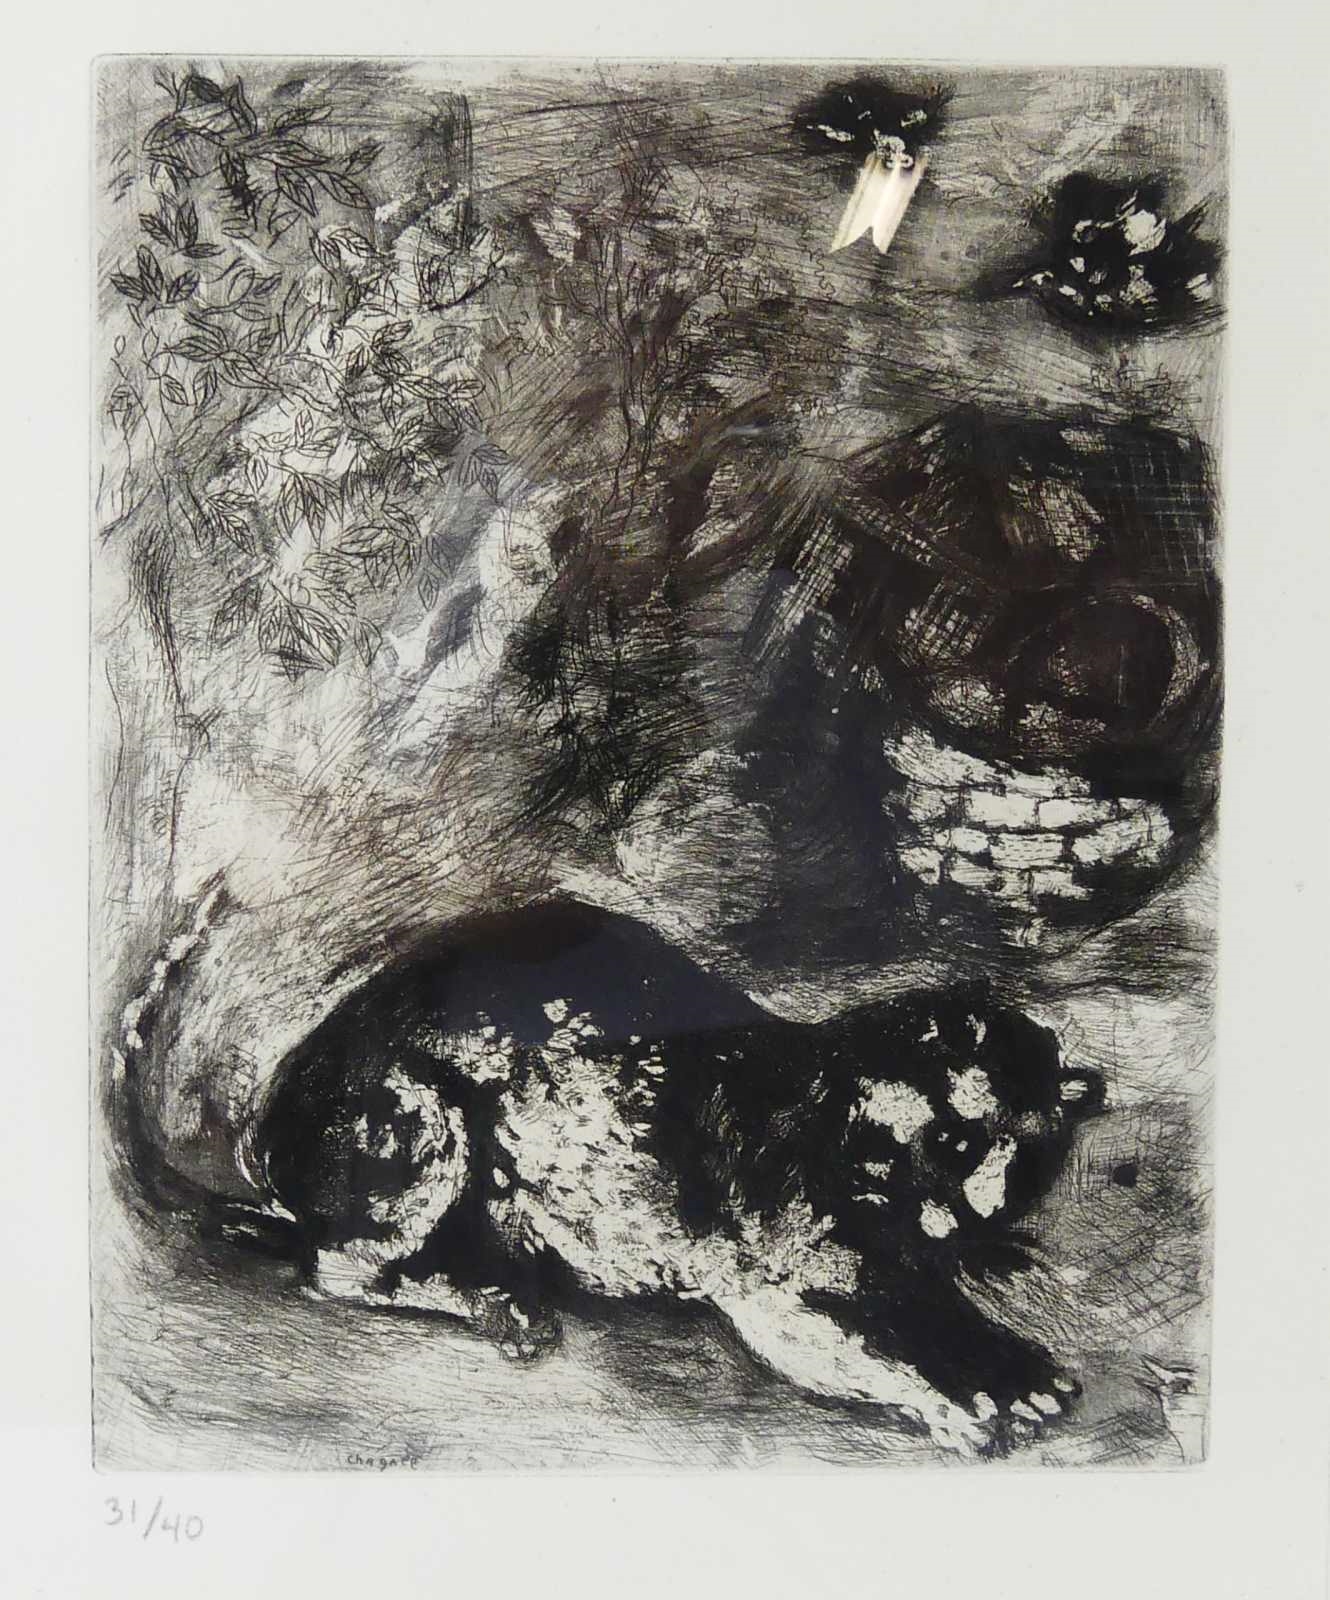 Artwork by Marc Chagall, The Cat and the Two Sparrows, Made of etching